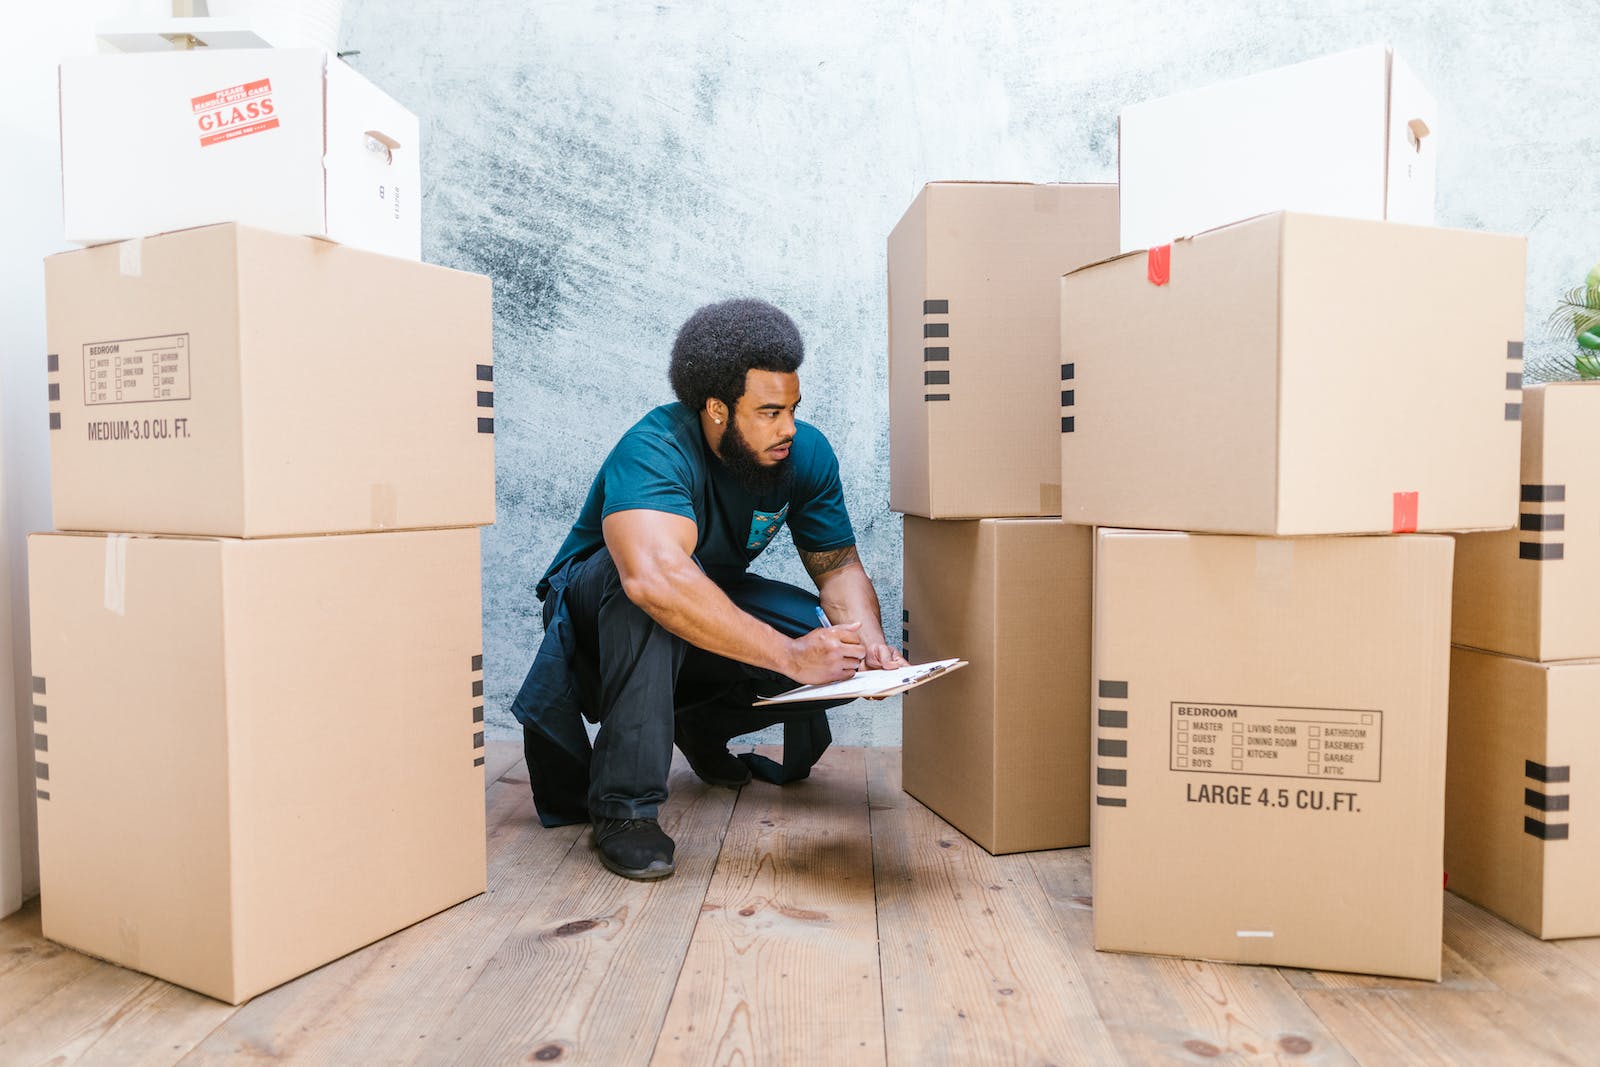 A Bearded Man Crouching Looking at Cardboard Boxes